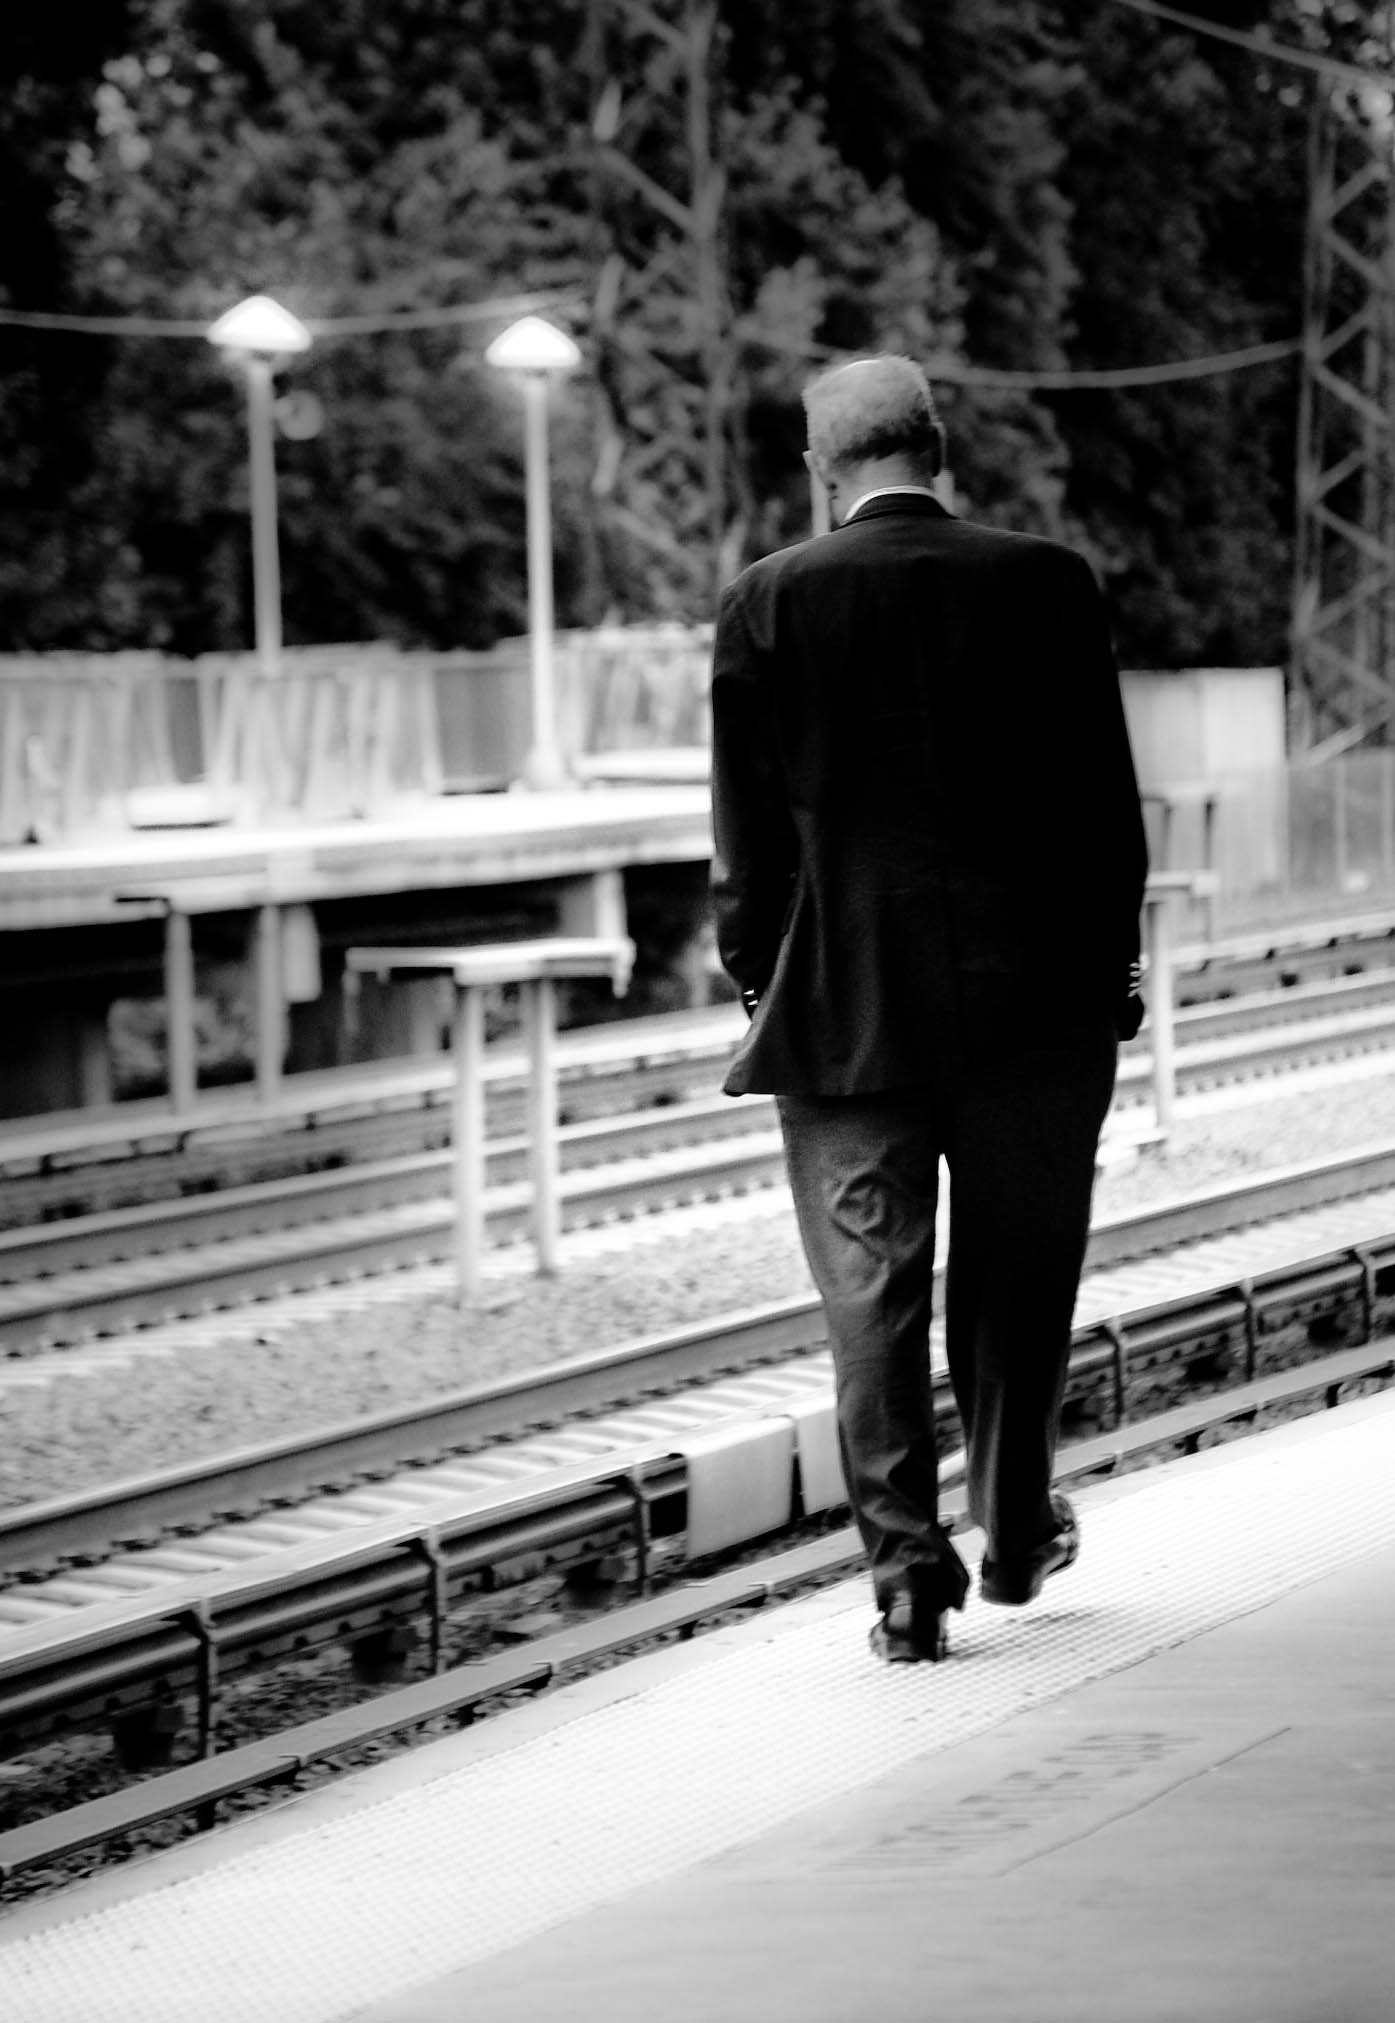 a man in suit walks away from the train tracks